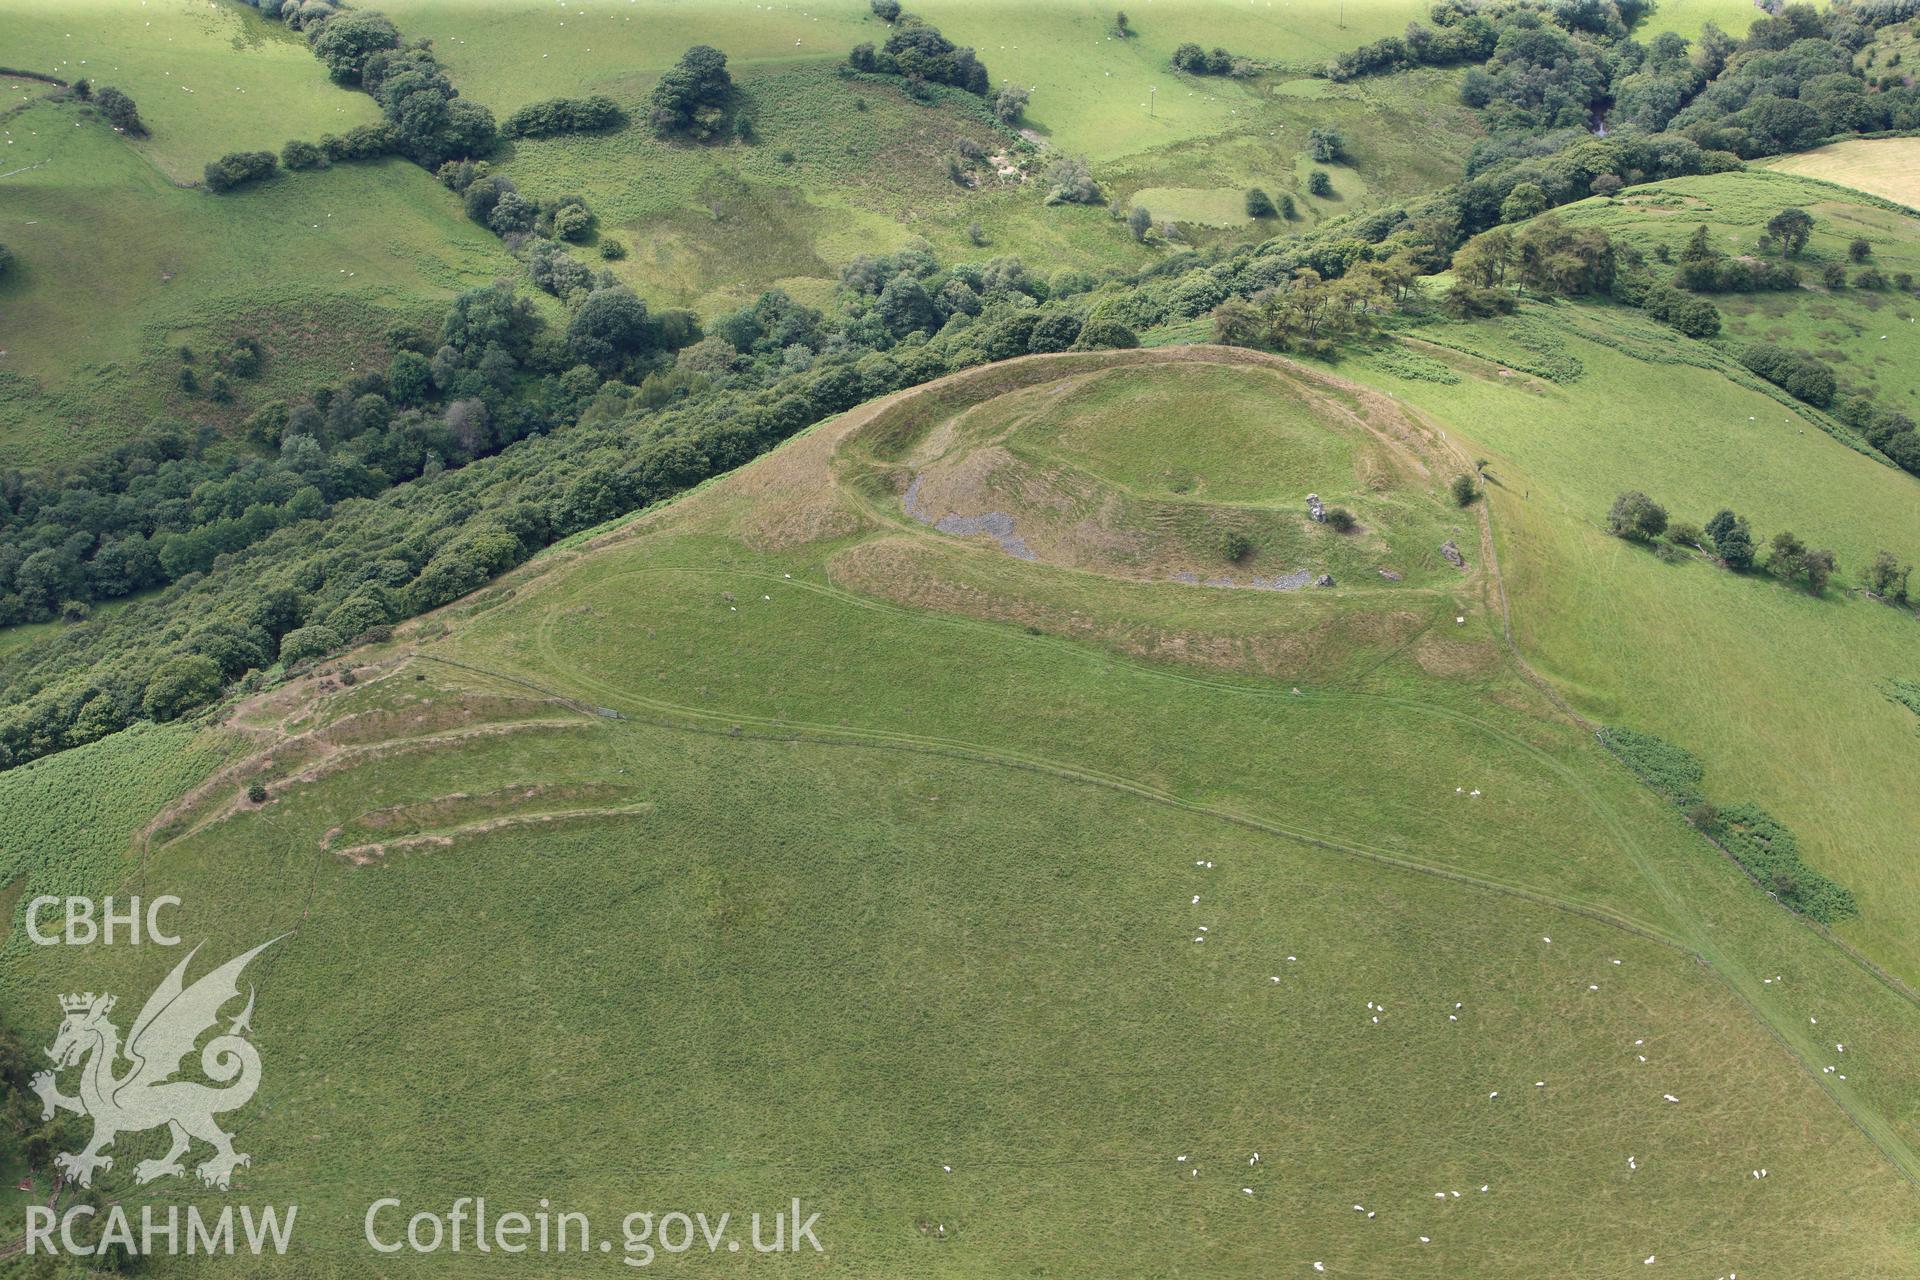 RCAHMW colour oblique photograph of Castell Tinboeth. Taken by Toby Driver on 20/07/2011.